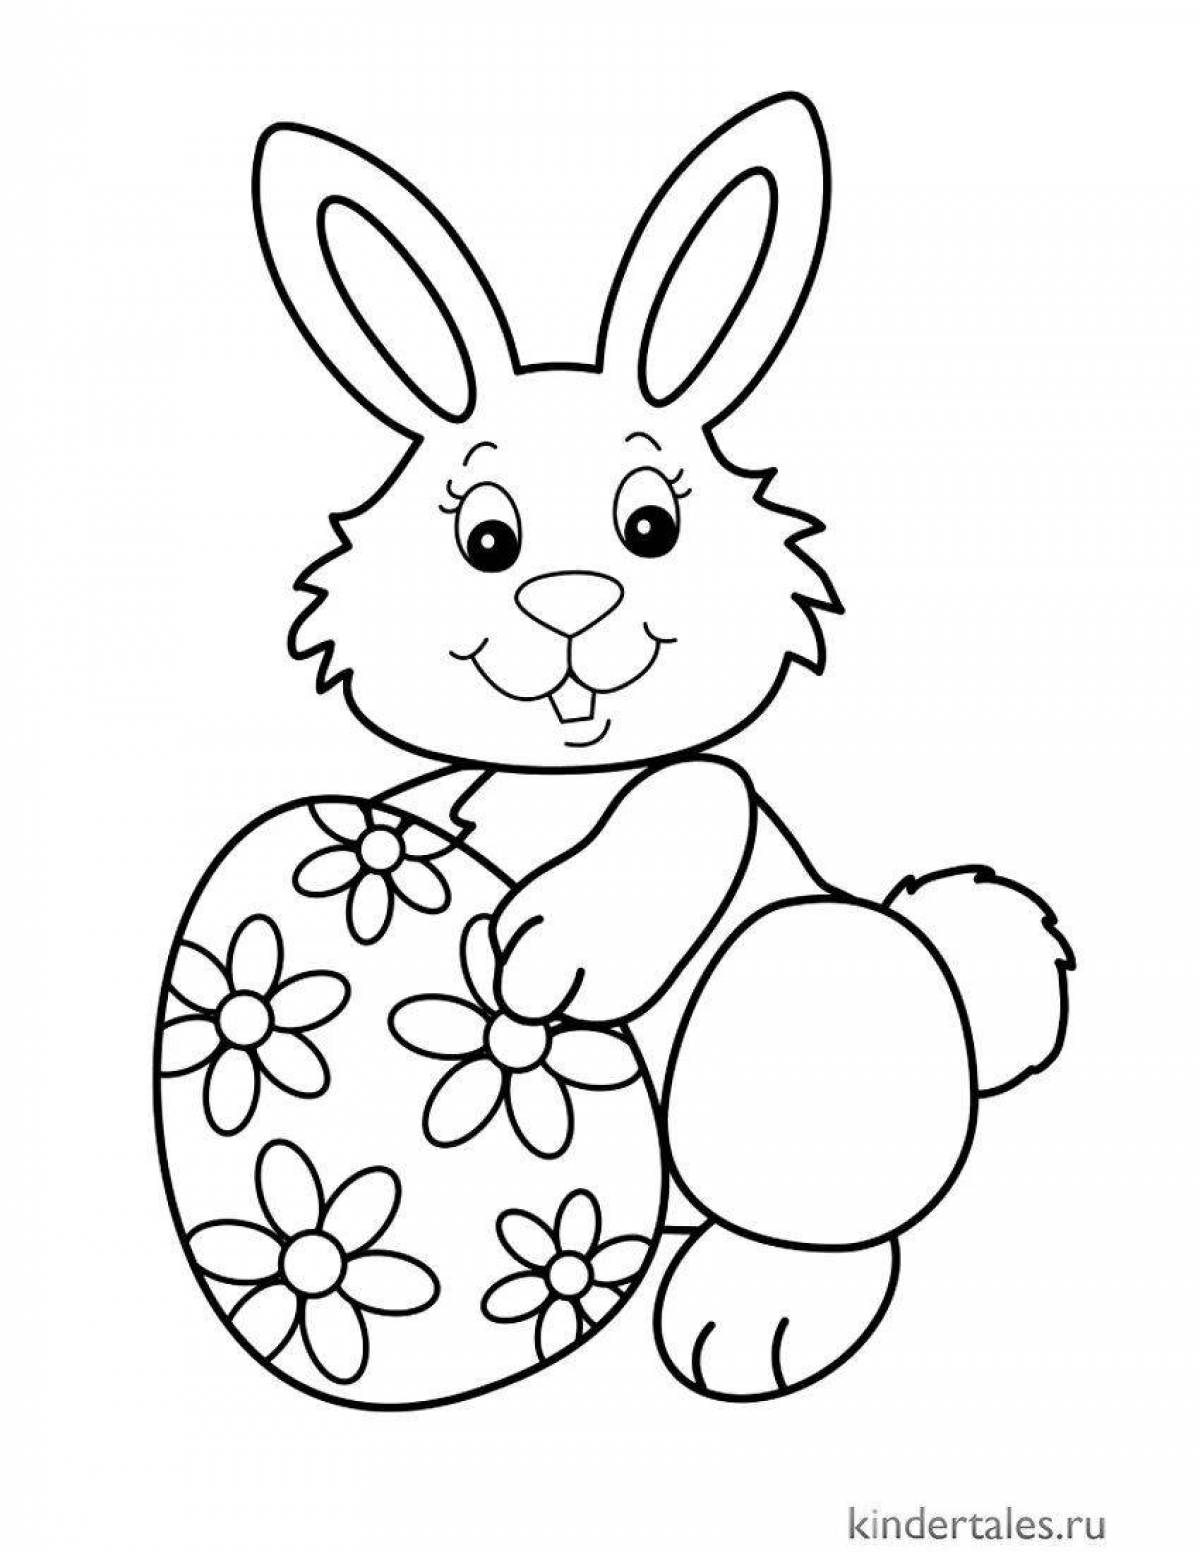 Exquisite rabbit coloring book for 6-7 year olds